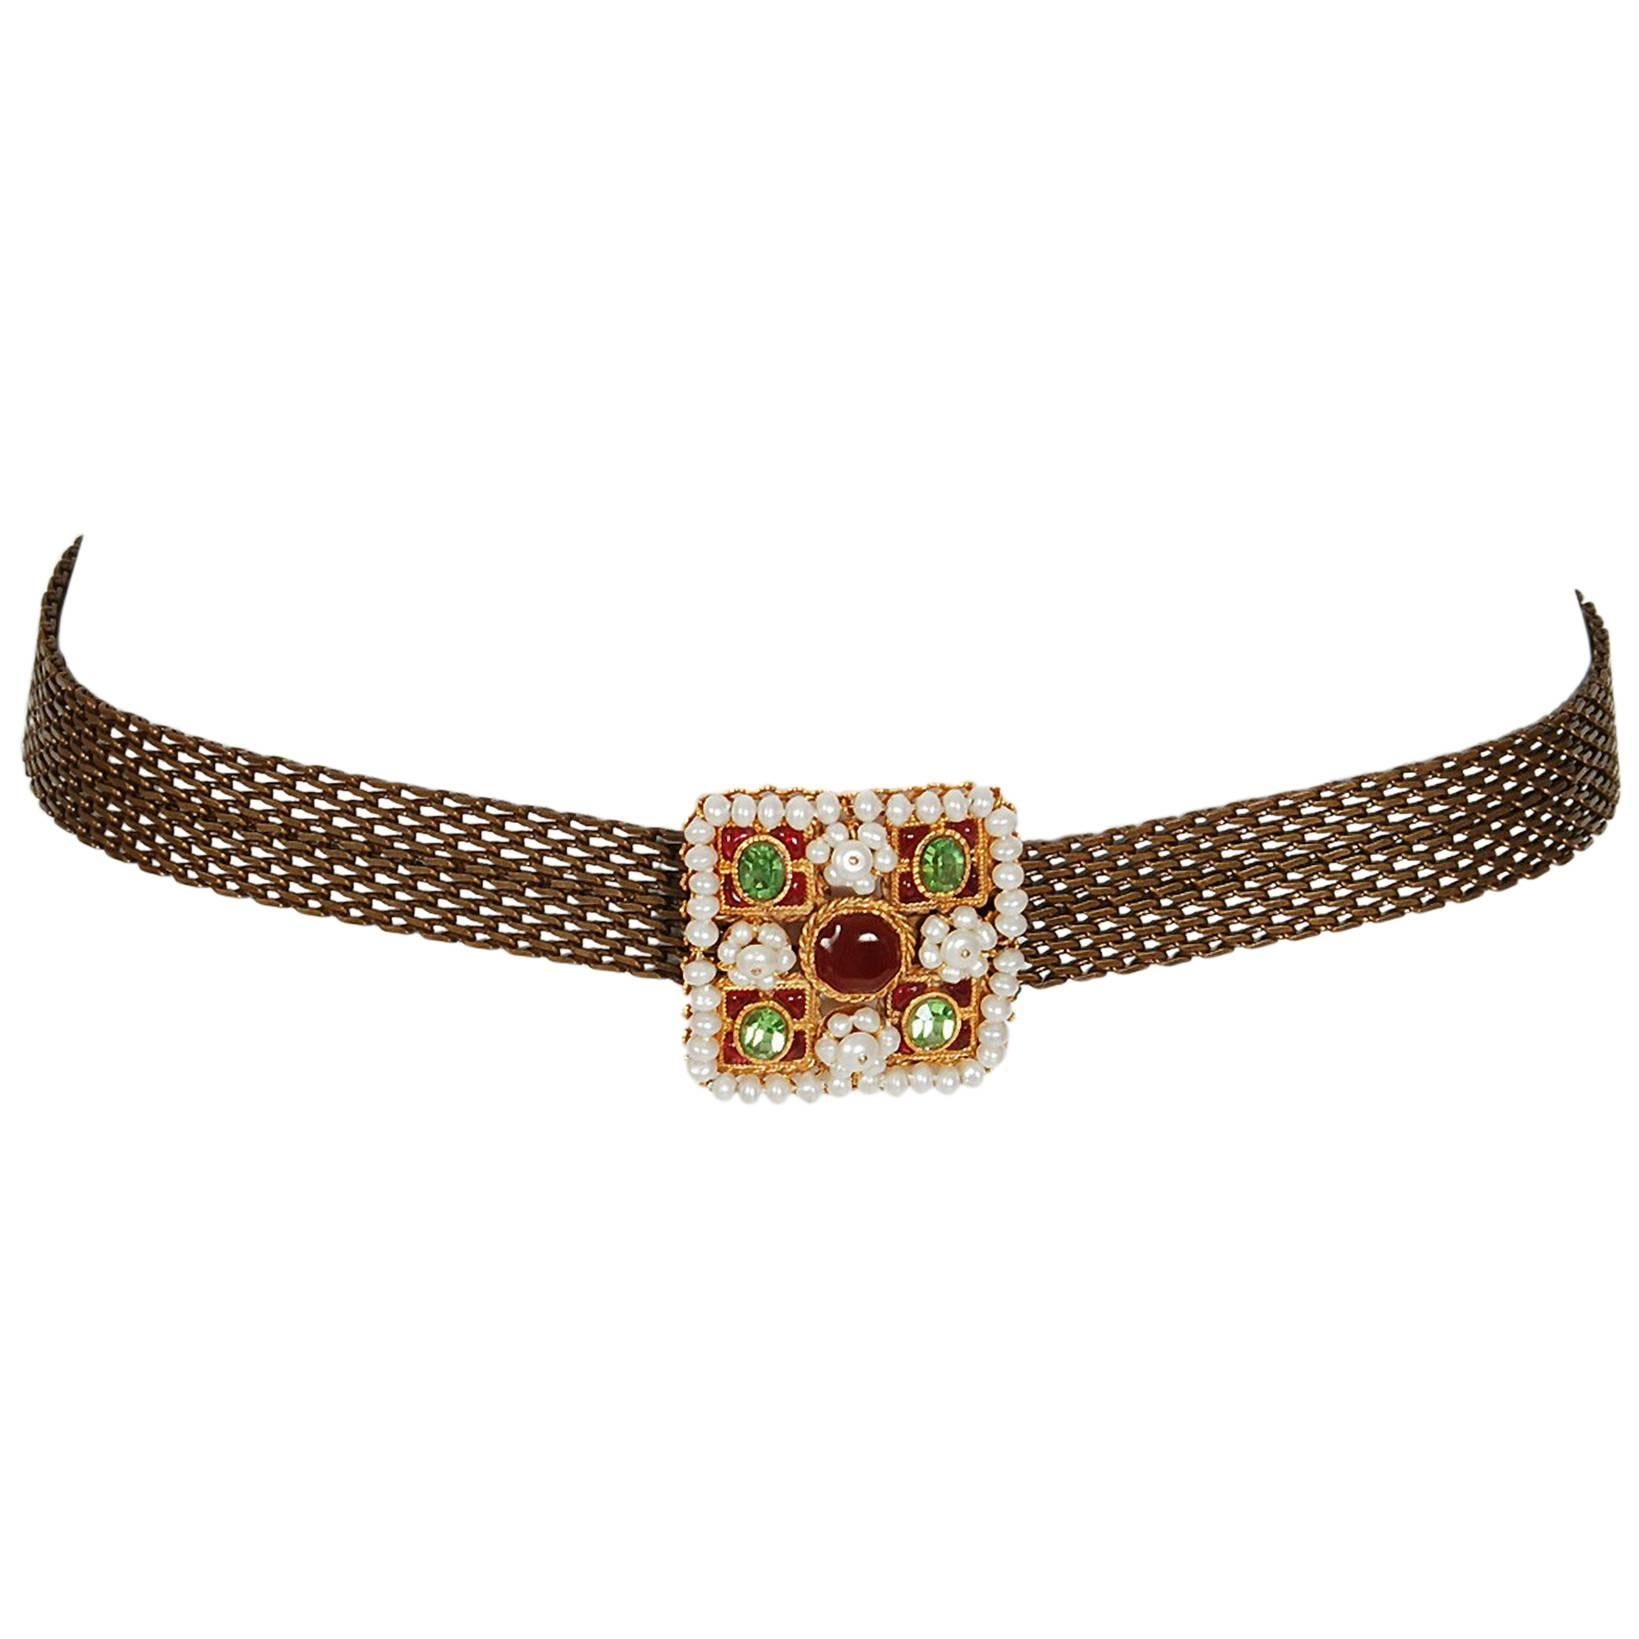 1997 Chanel Rare Colorful Gripoix & Pearls Buckle Gold-Tone Chain Link Belt